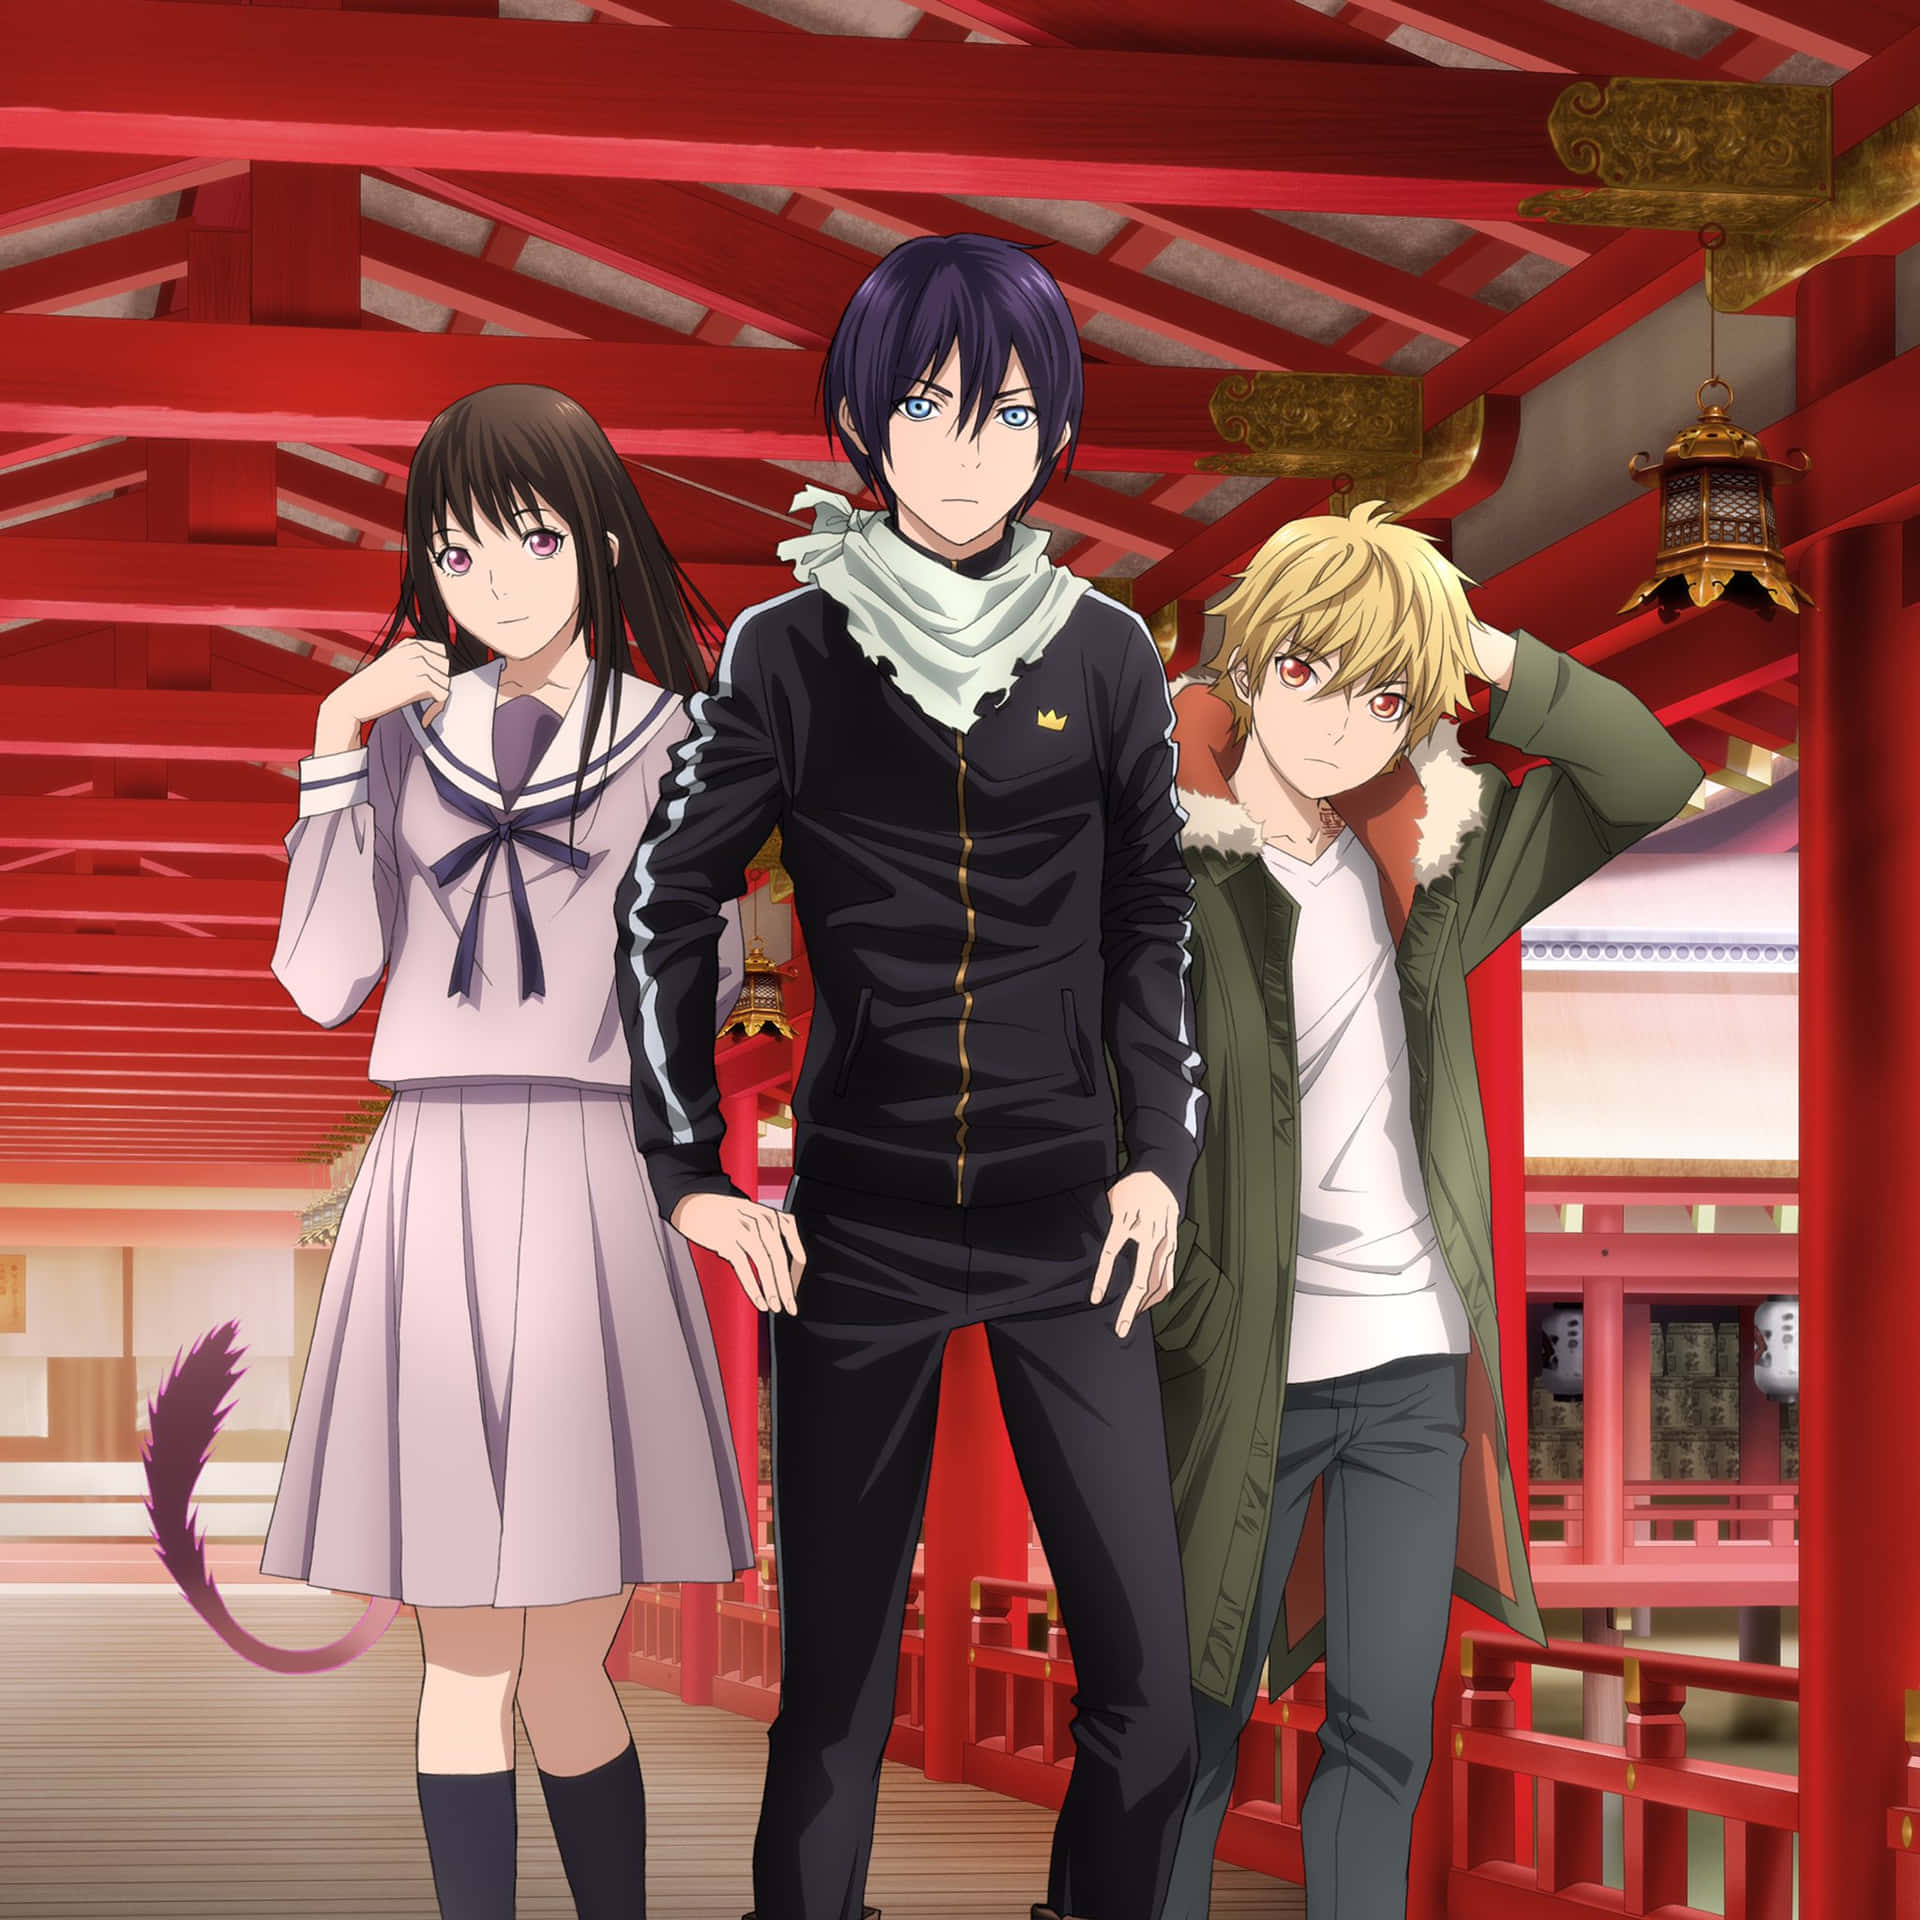 The god of fortune, Yato, and his sidekick and scrapper, Yukine